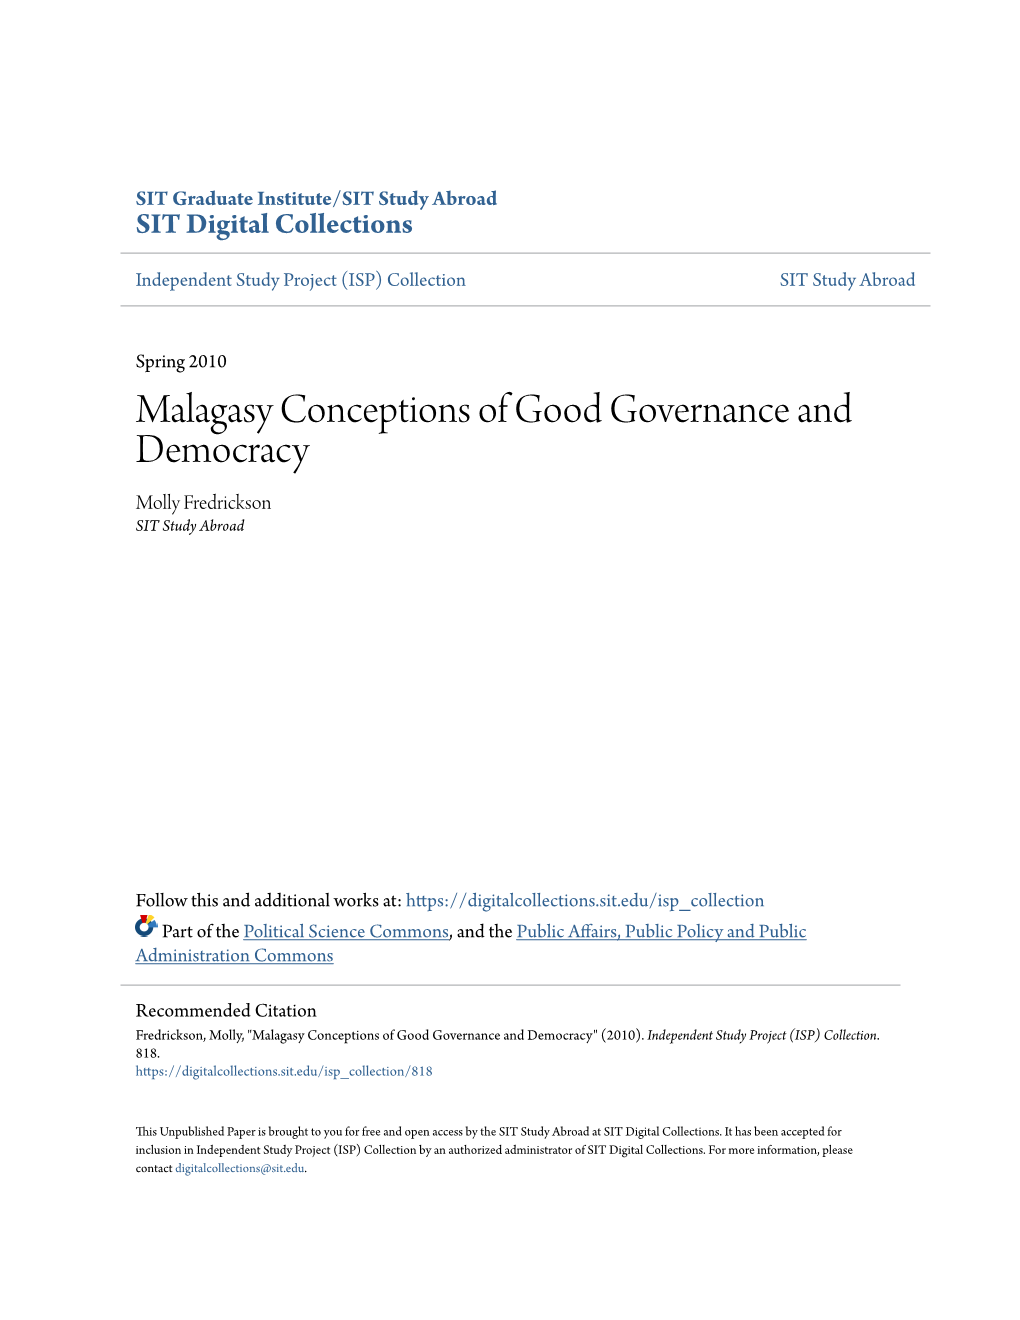 Malagasy Conceptions of Good Governance and Democracy Molly Fredrickson SIT Study Abroad